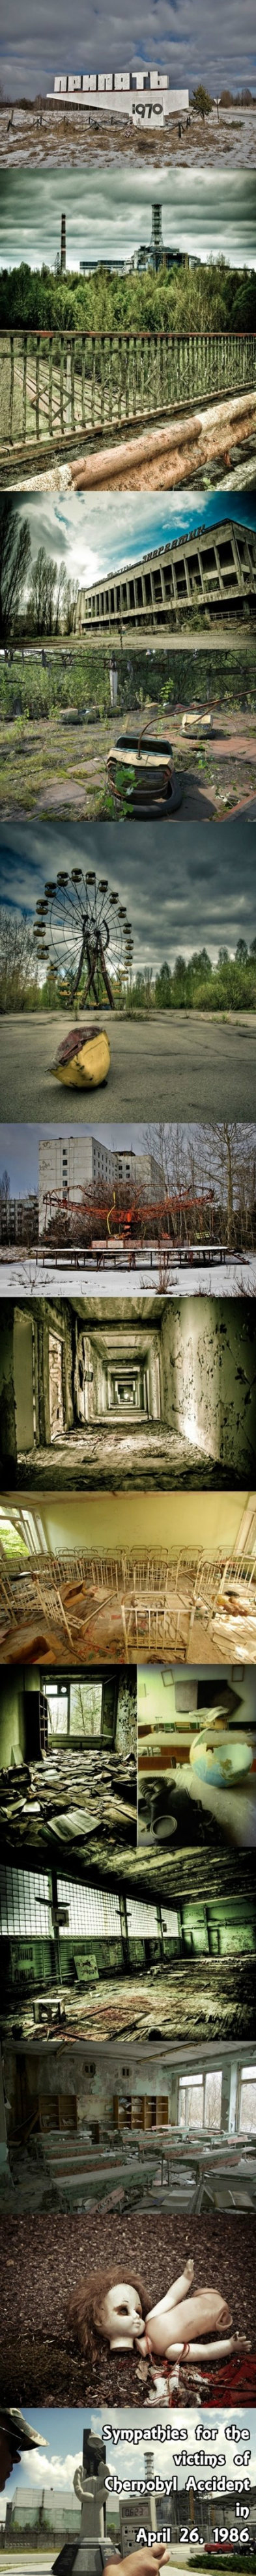 Chernobyl - 26 years. Marking the 26th anniversary since the Chernobyl nuclear disaster.. Iar all. if there weren't risks of radiation there, it'd make a sick paintball arena